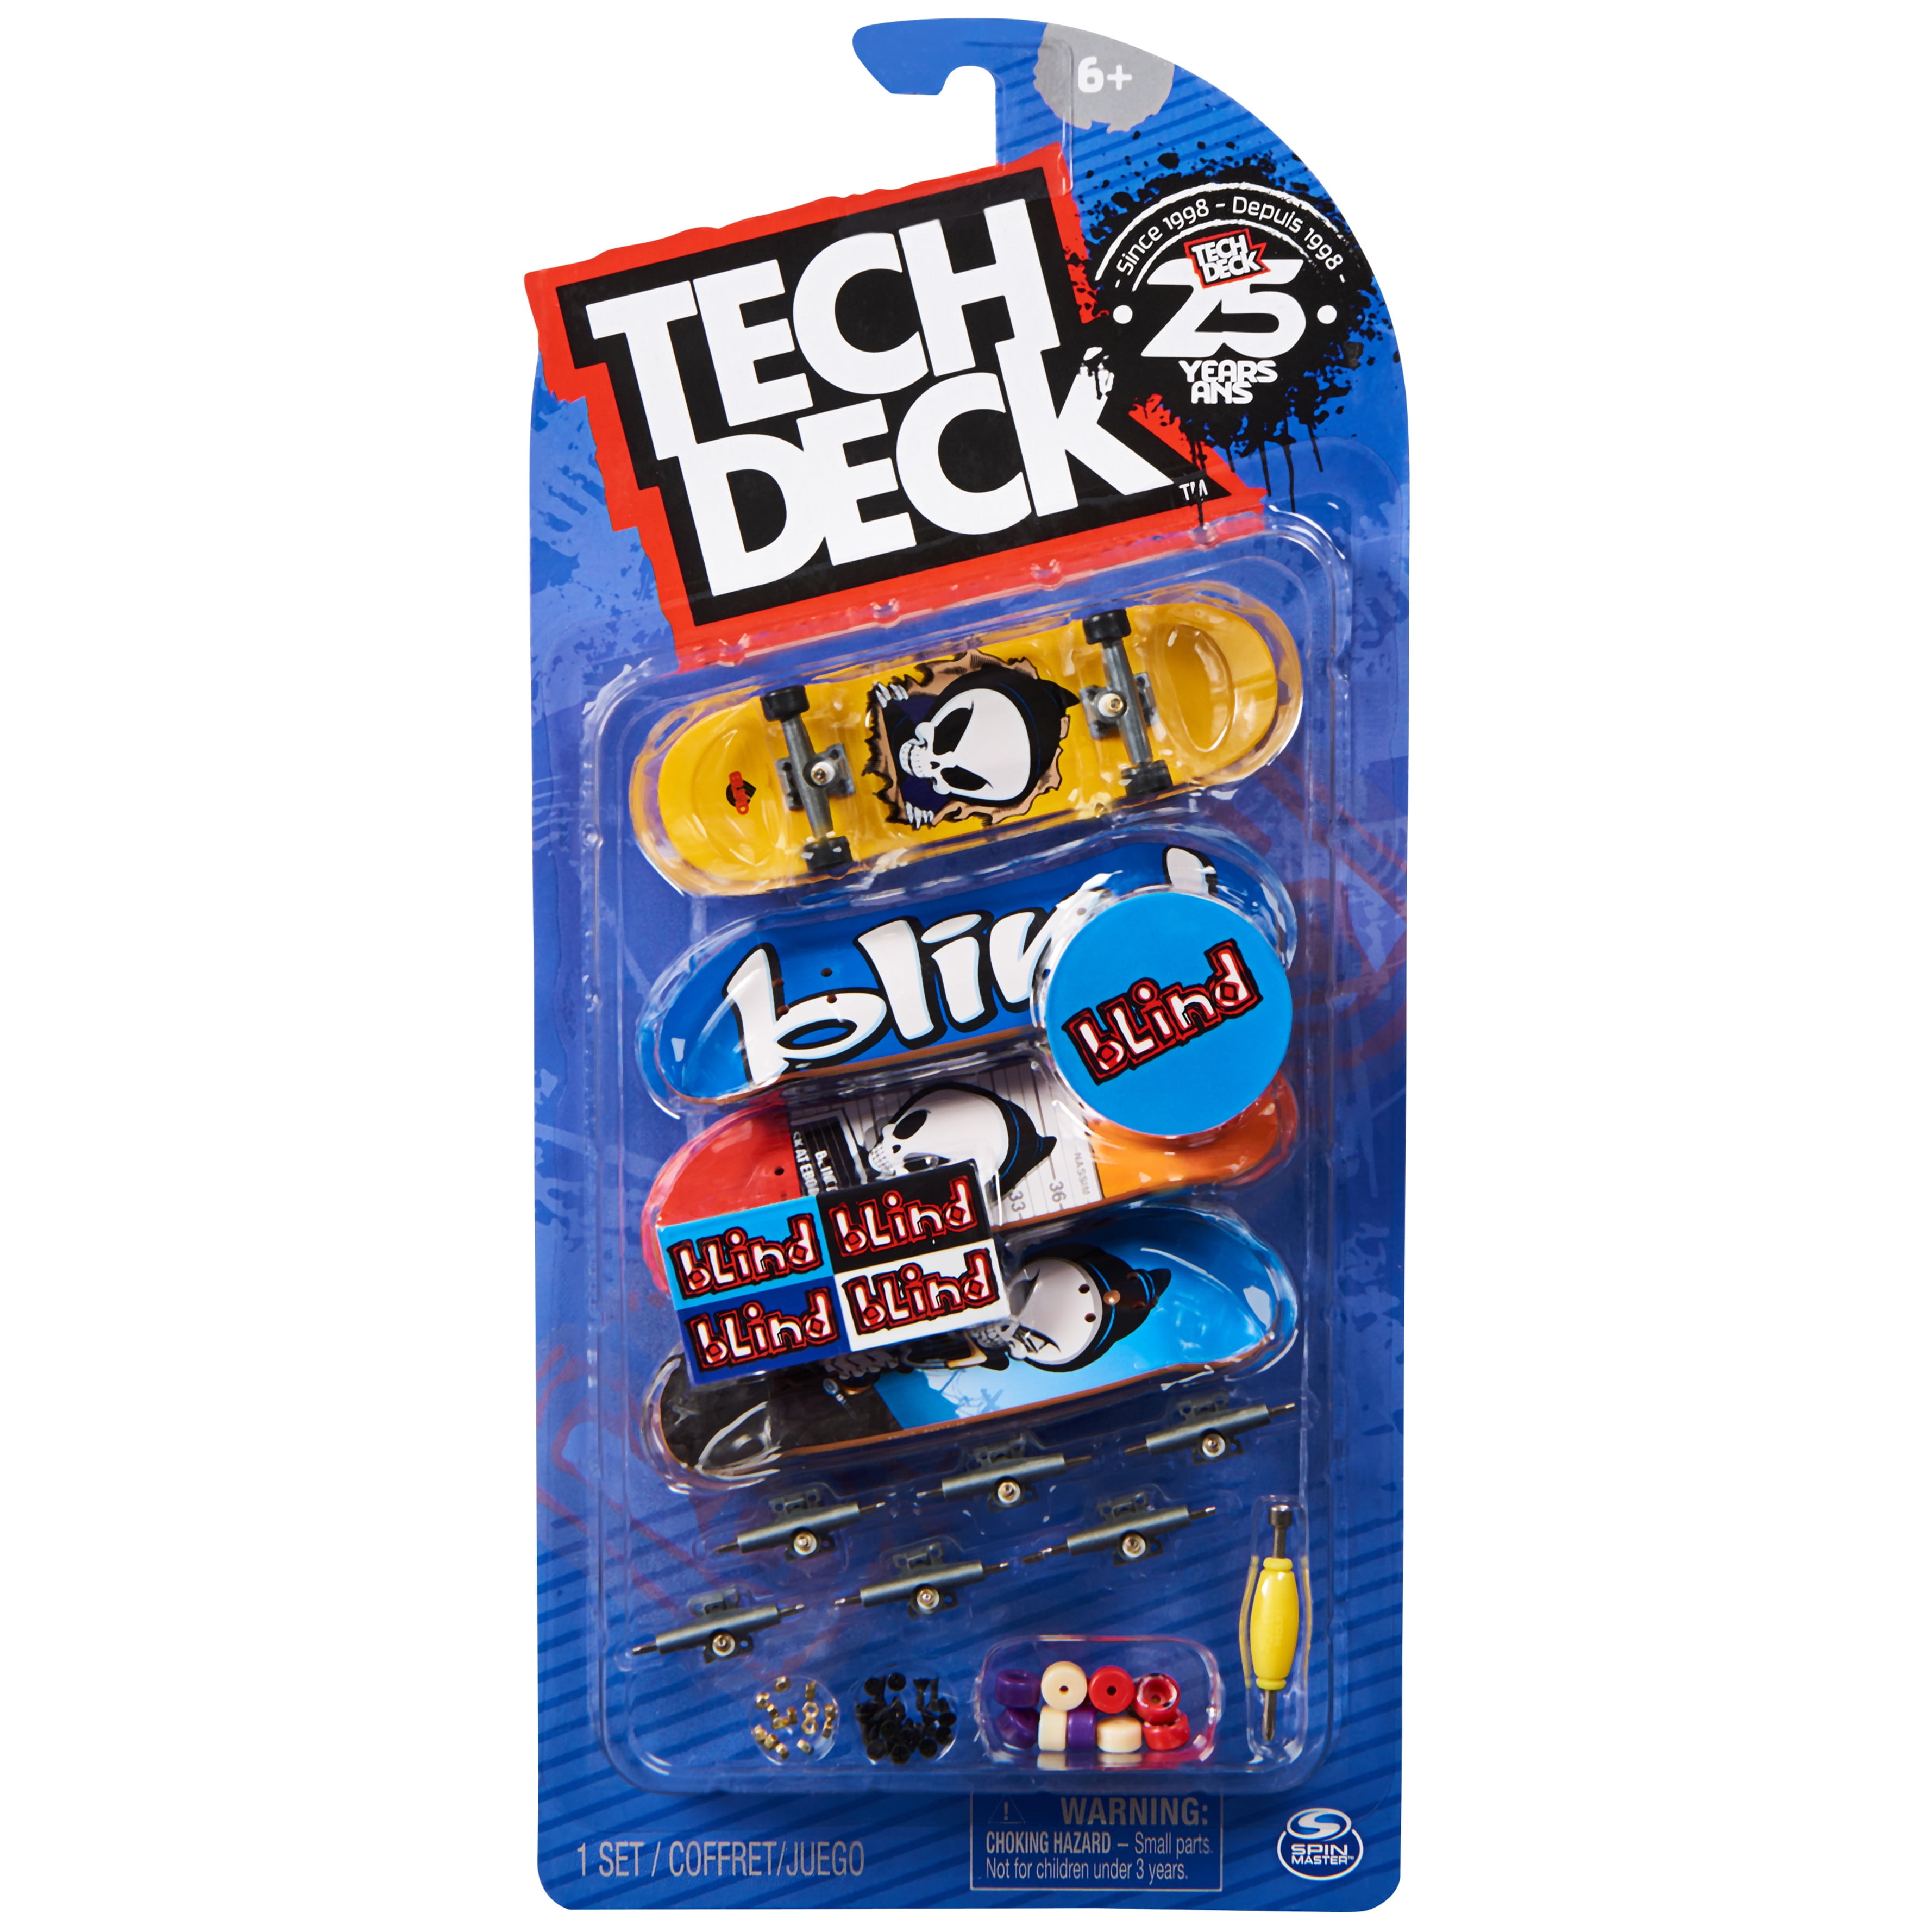 Tech Deck, Ultra DLX Fingerboard 4-Pack, Blind Skateboards, Collectible and Customizable Mini Skateboards, Kids Toys and up - Walmart.com